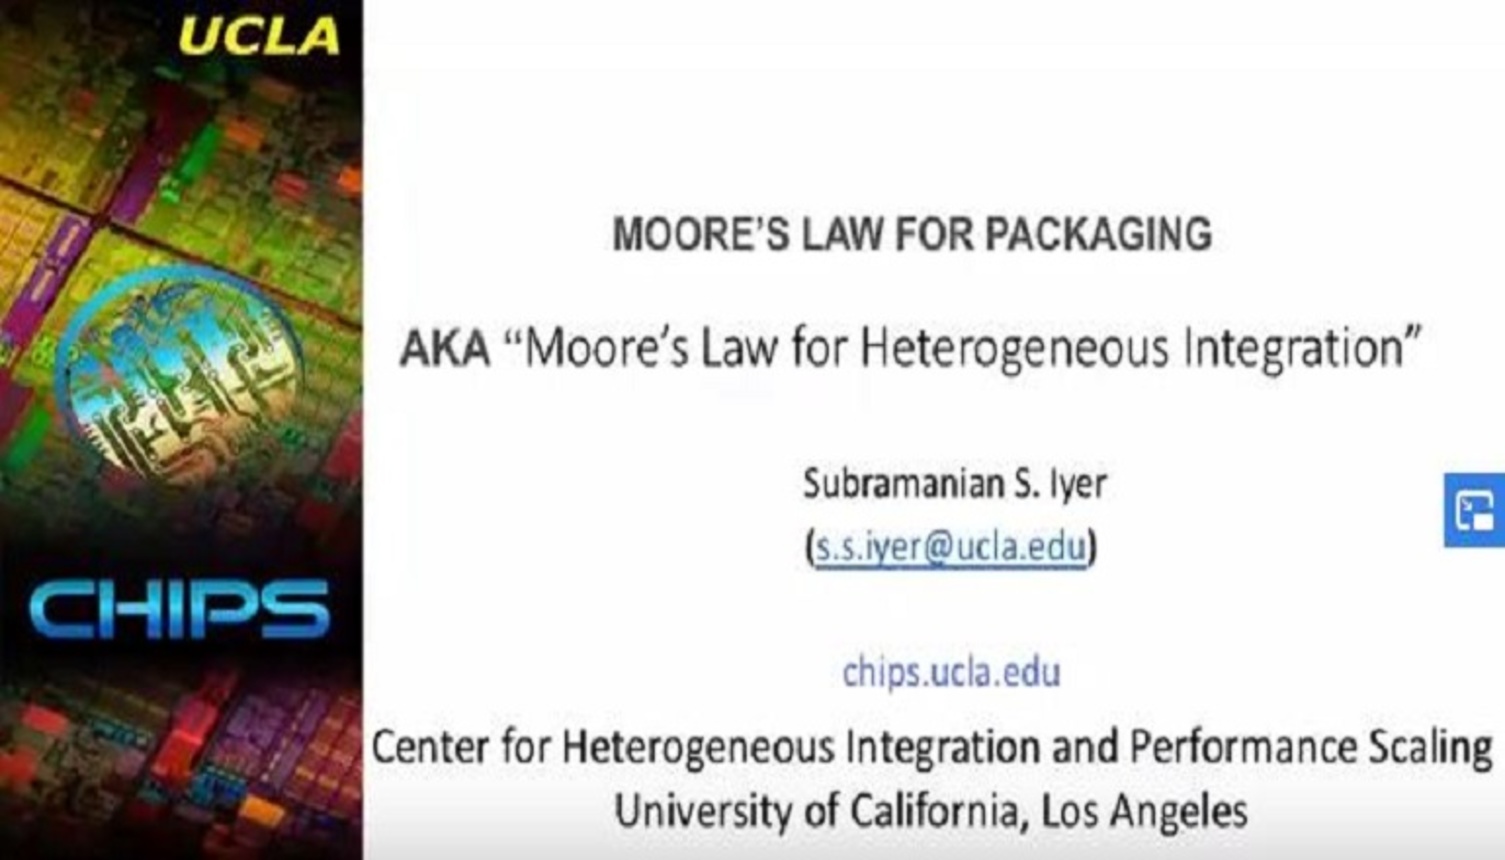 Moore's Law for Packaging aka "Moore's Law for Heterogeneous Integration"